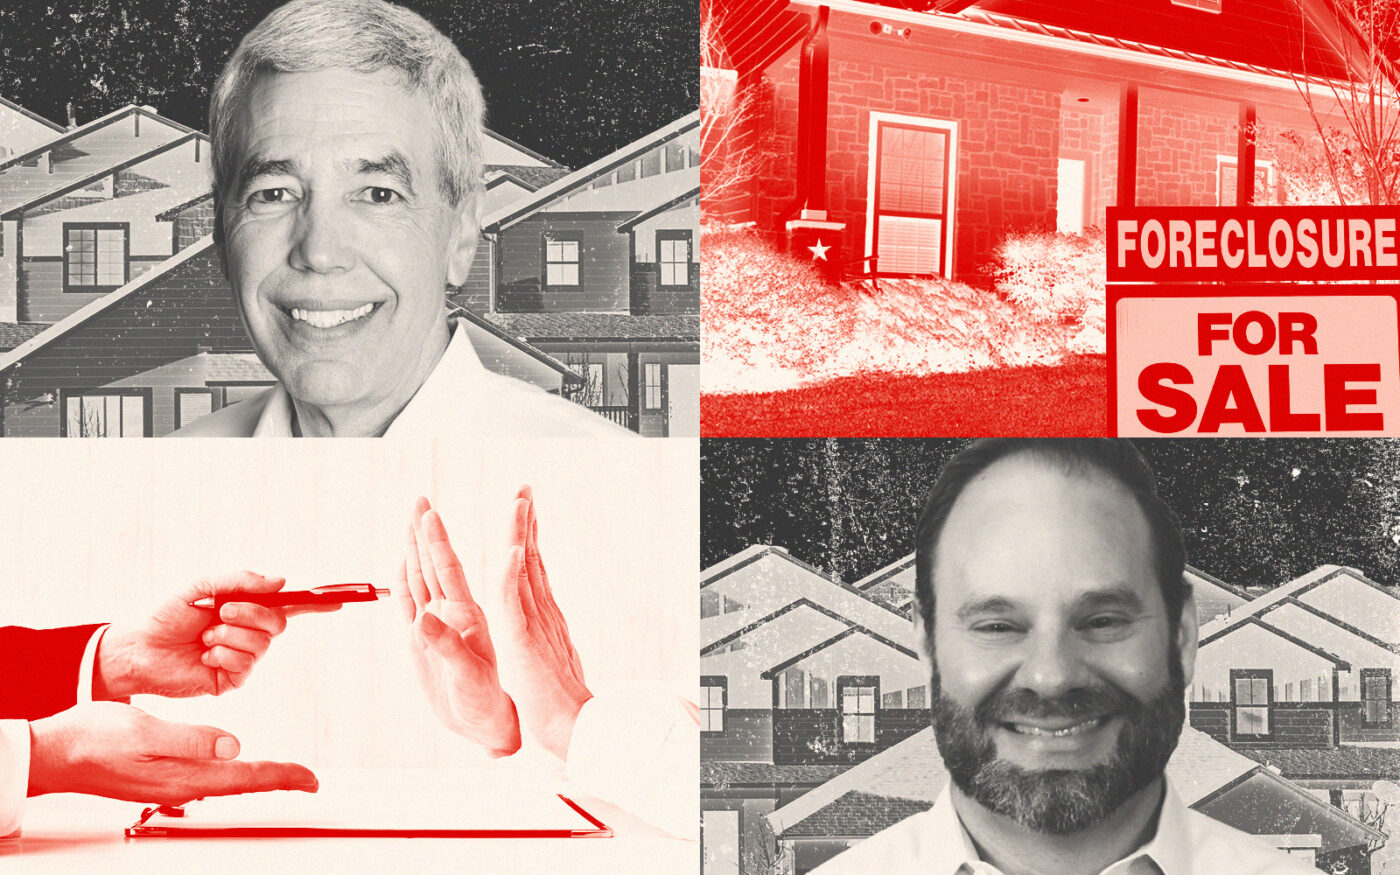 HomeVestors' David Hicks and Anthony Lowenberg; foreclosed house; hands refusing to sign documents